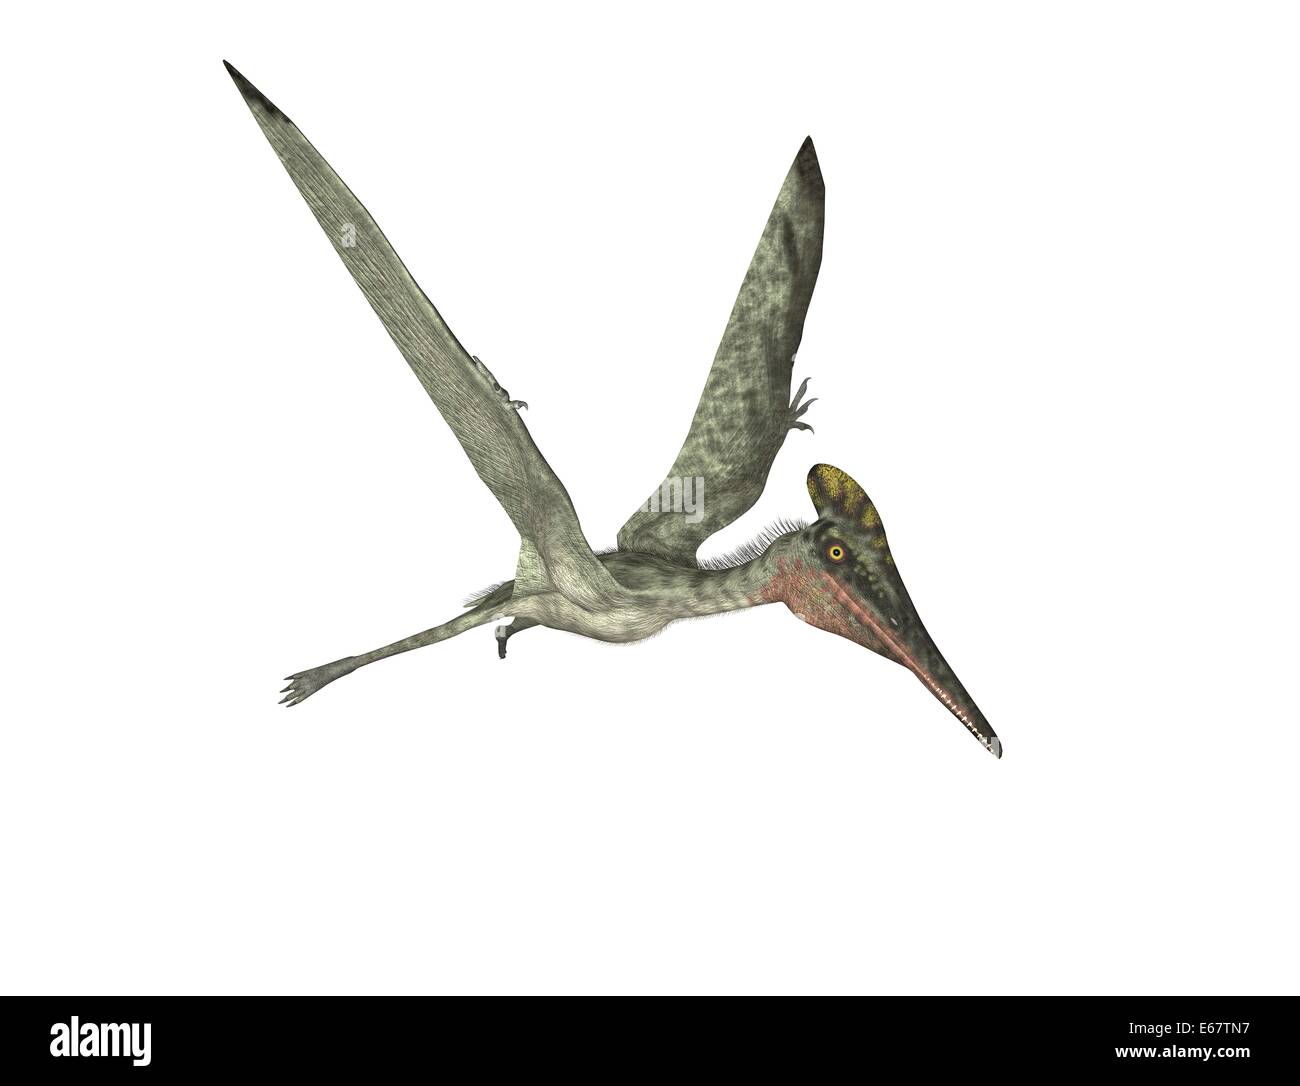 Dinosaure Pterodactylus Dinosaurier Pterodactylus / Banque D'Images